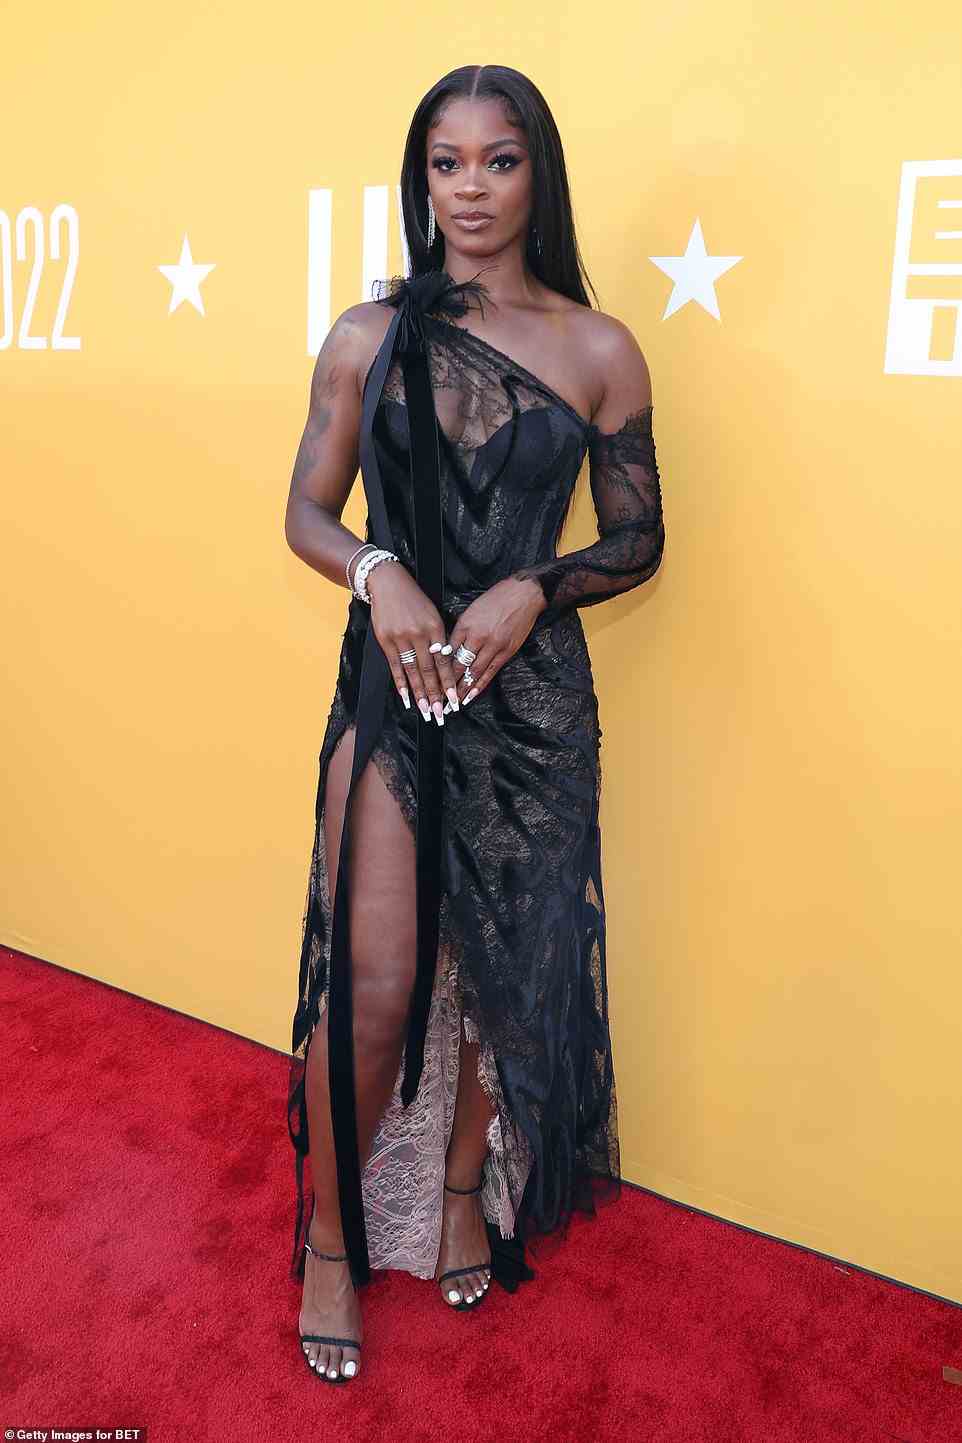 Lace vision: R&B singer Ari Lennox, 31, cut a chic figure in a transparent black lace gown with a bow detail on the shoulder